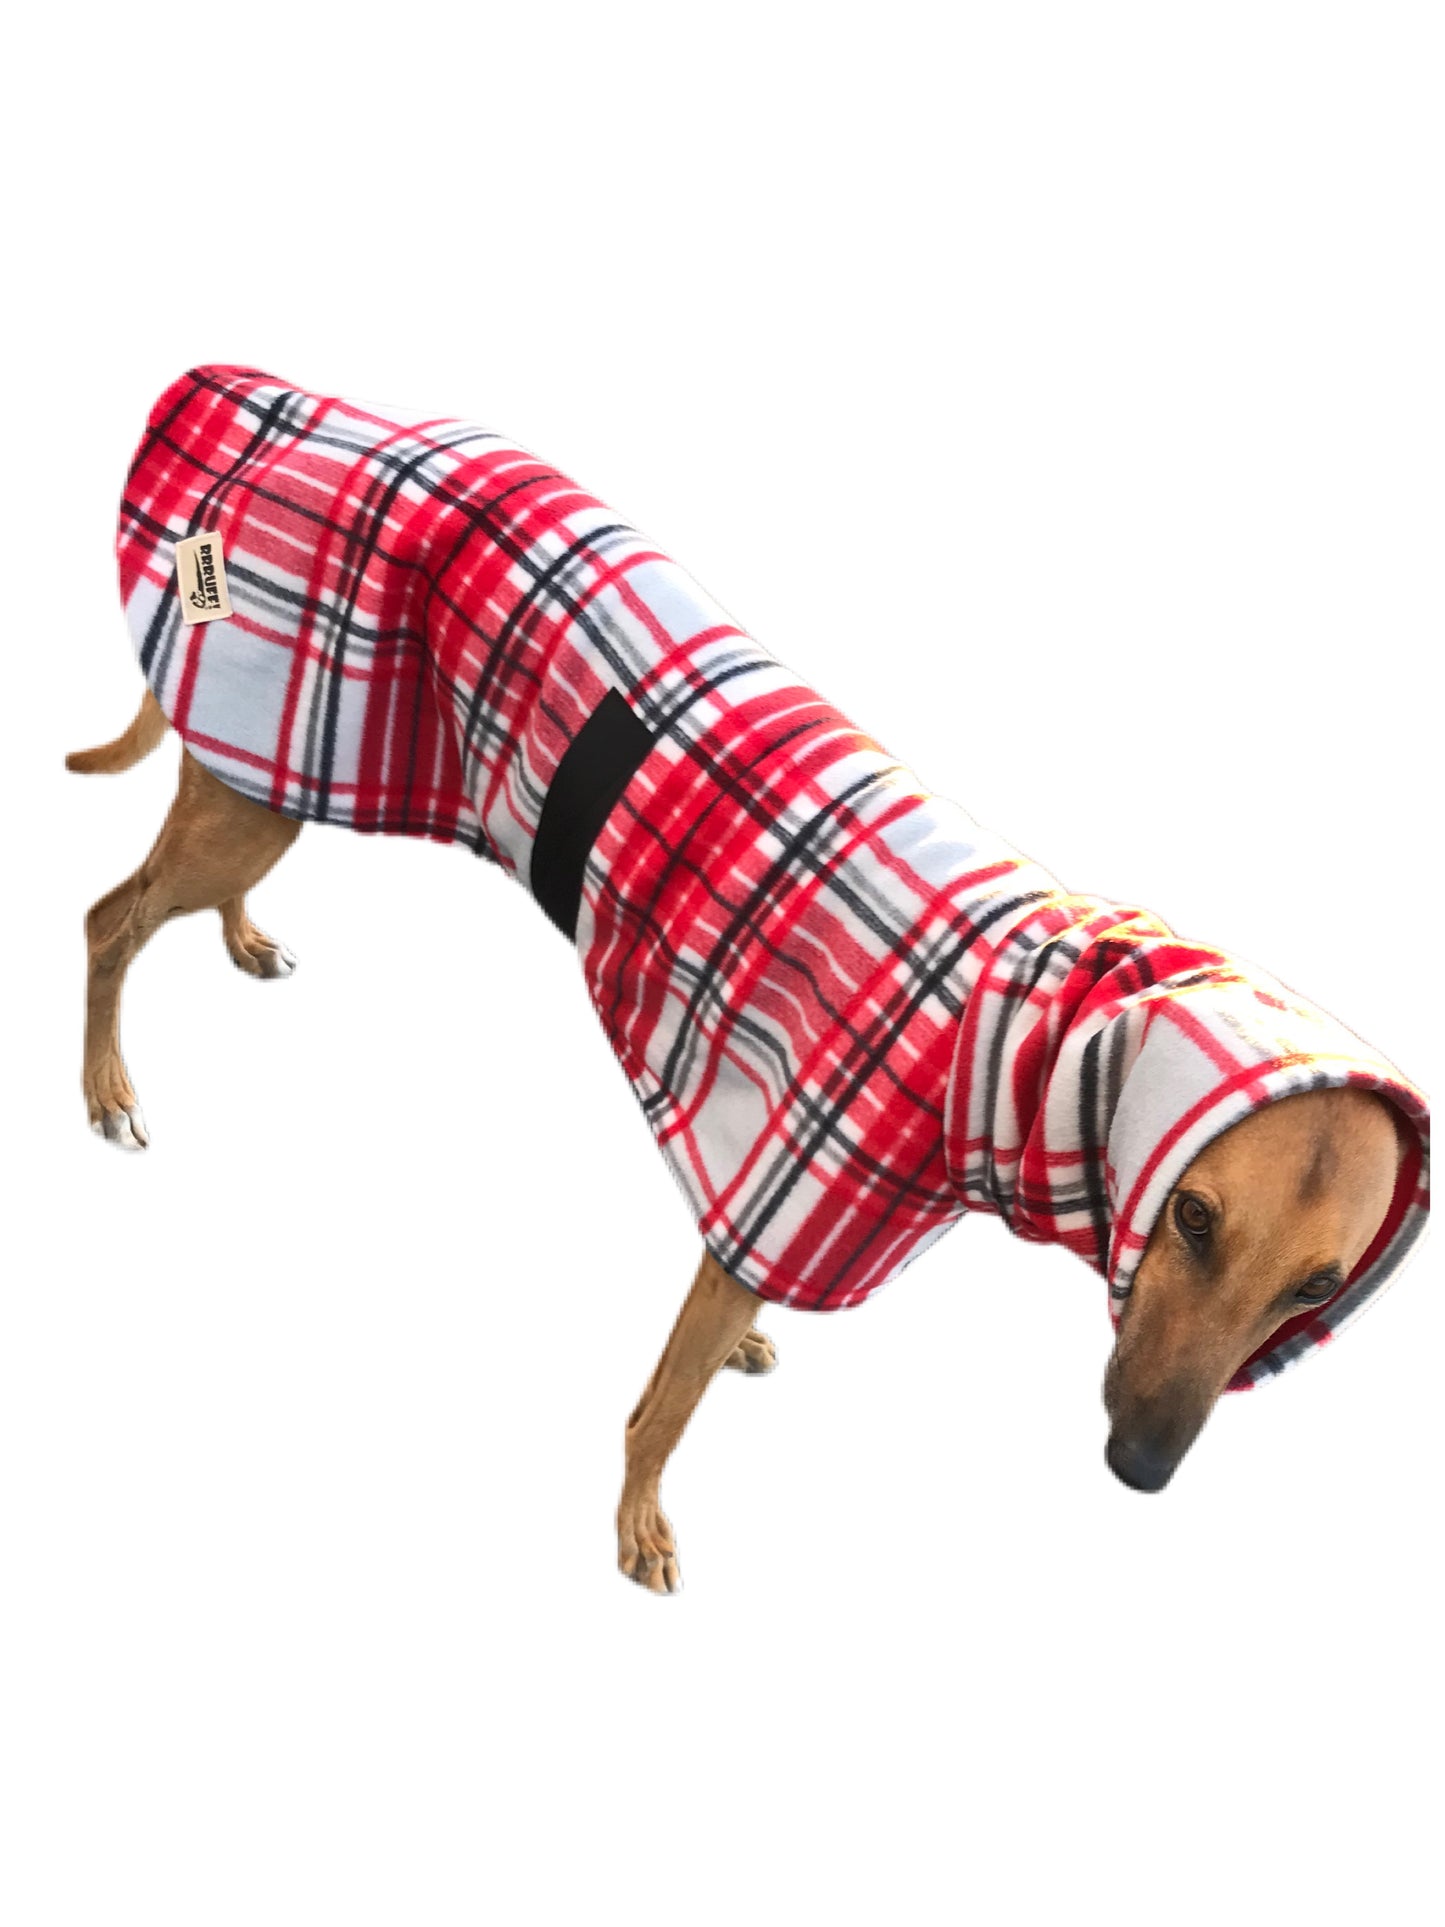 Greyhound coat in deluxe style rug red flanno tartan polar fleece washable extra wide neck